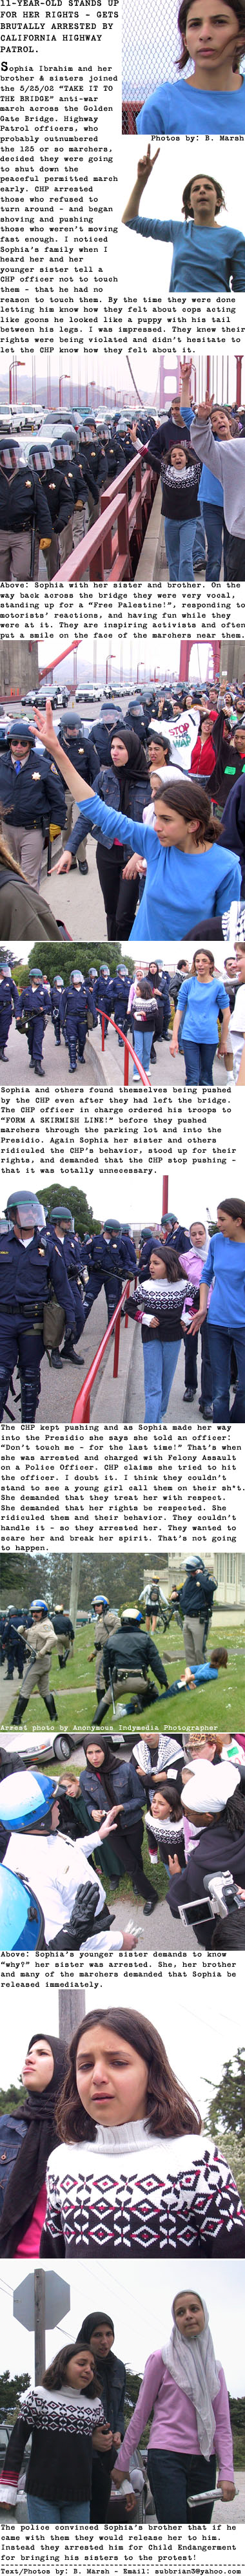 11_year_old_arrested_by_chp.jpg 